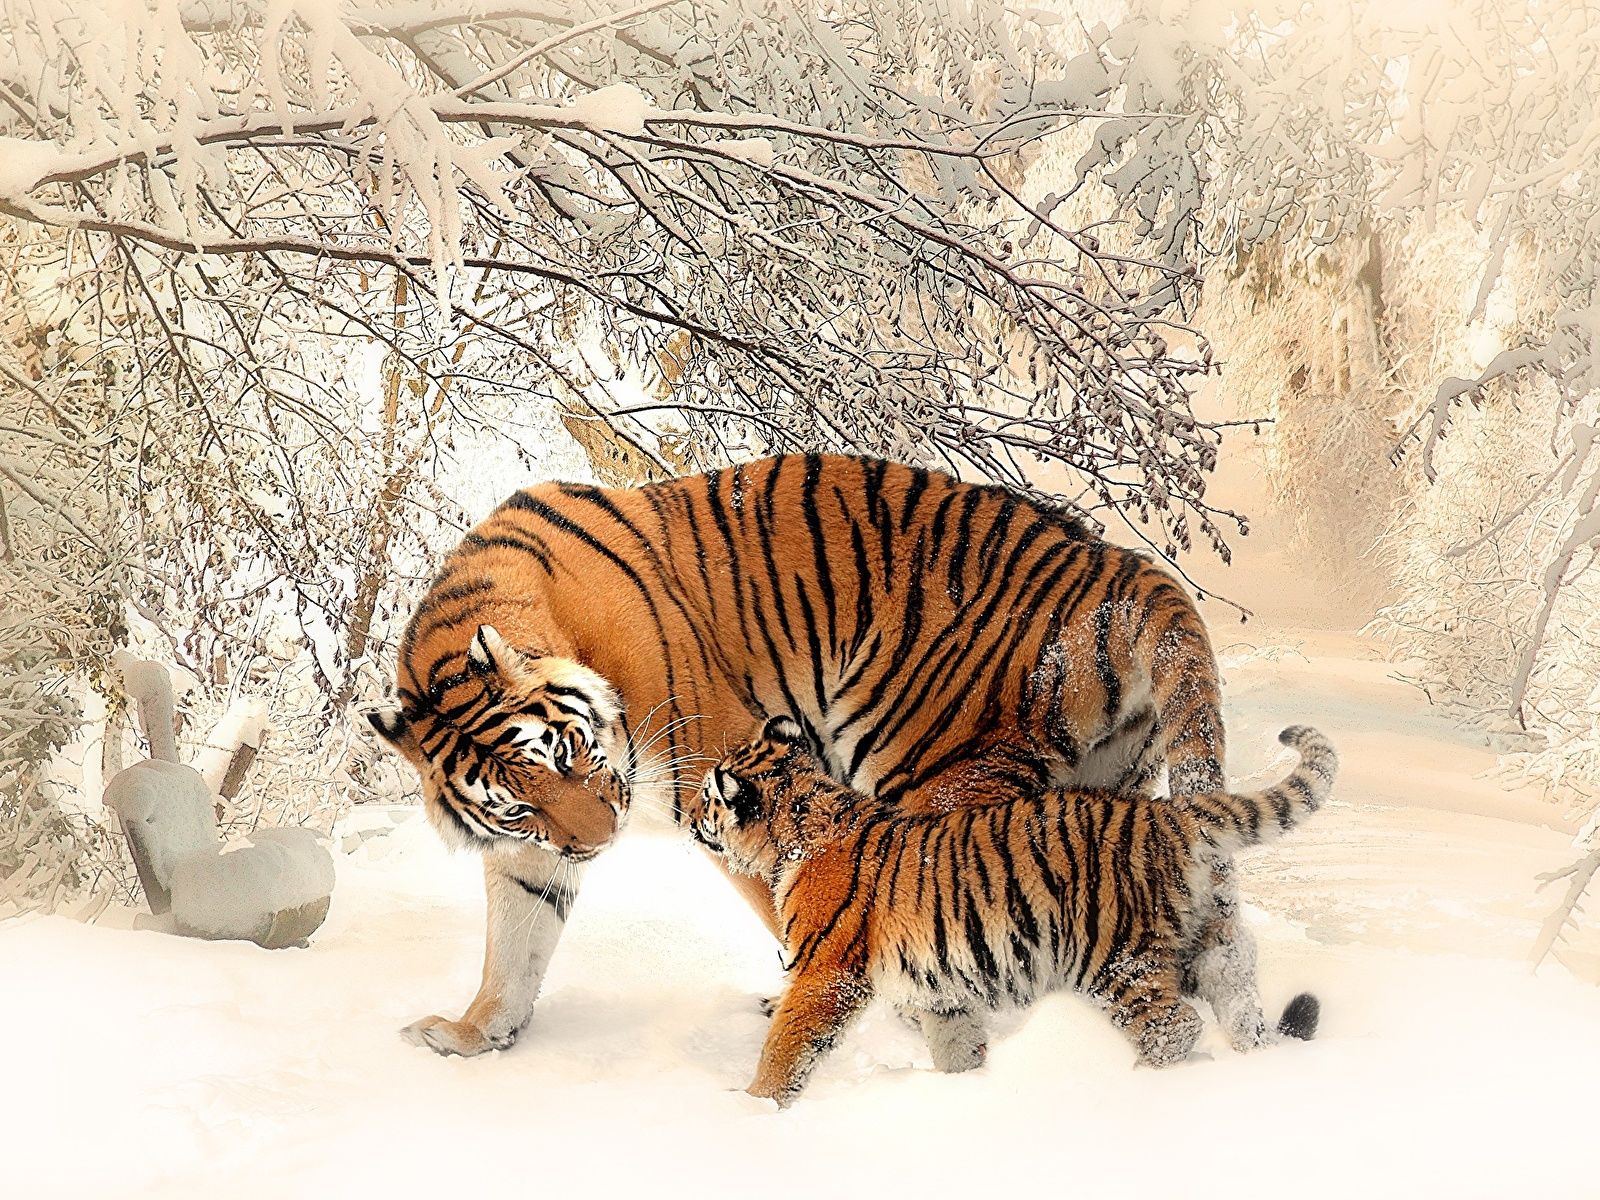 Wallpaper tiger Cubs Two Winter Snow Animals 1600x1200